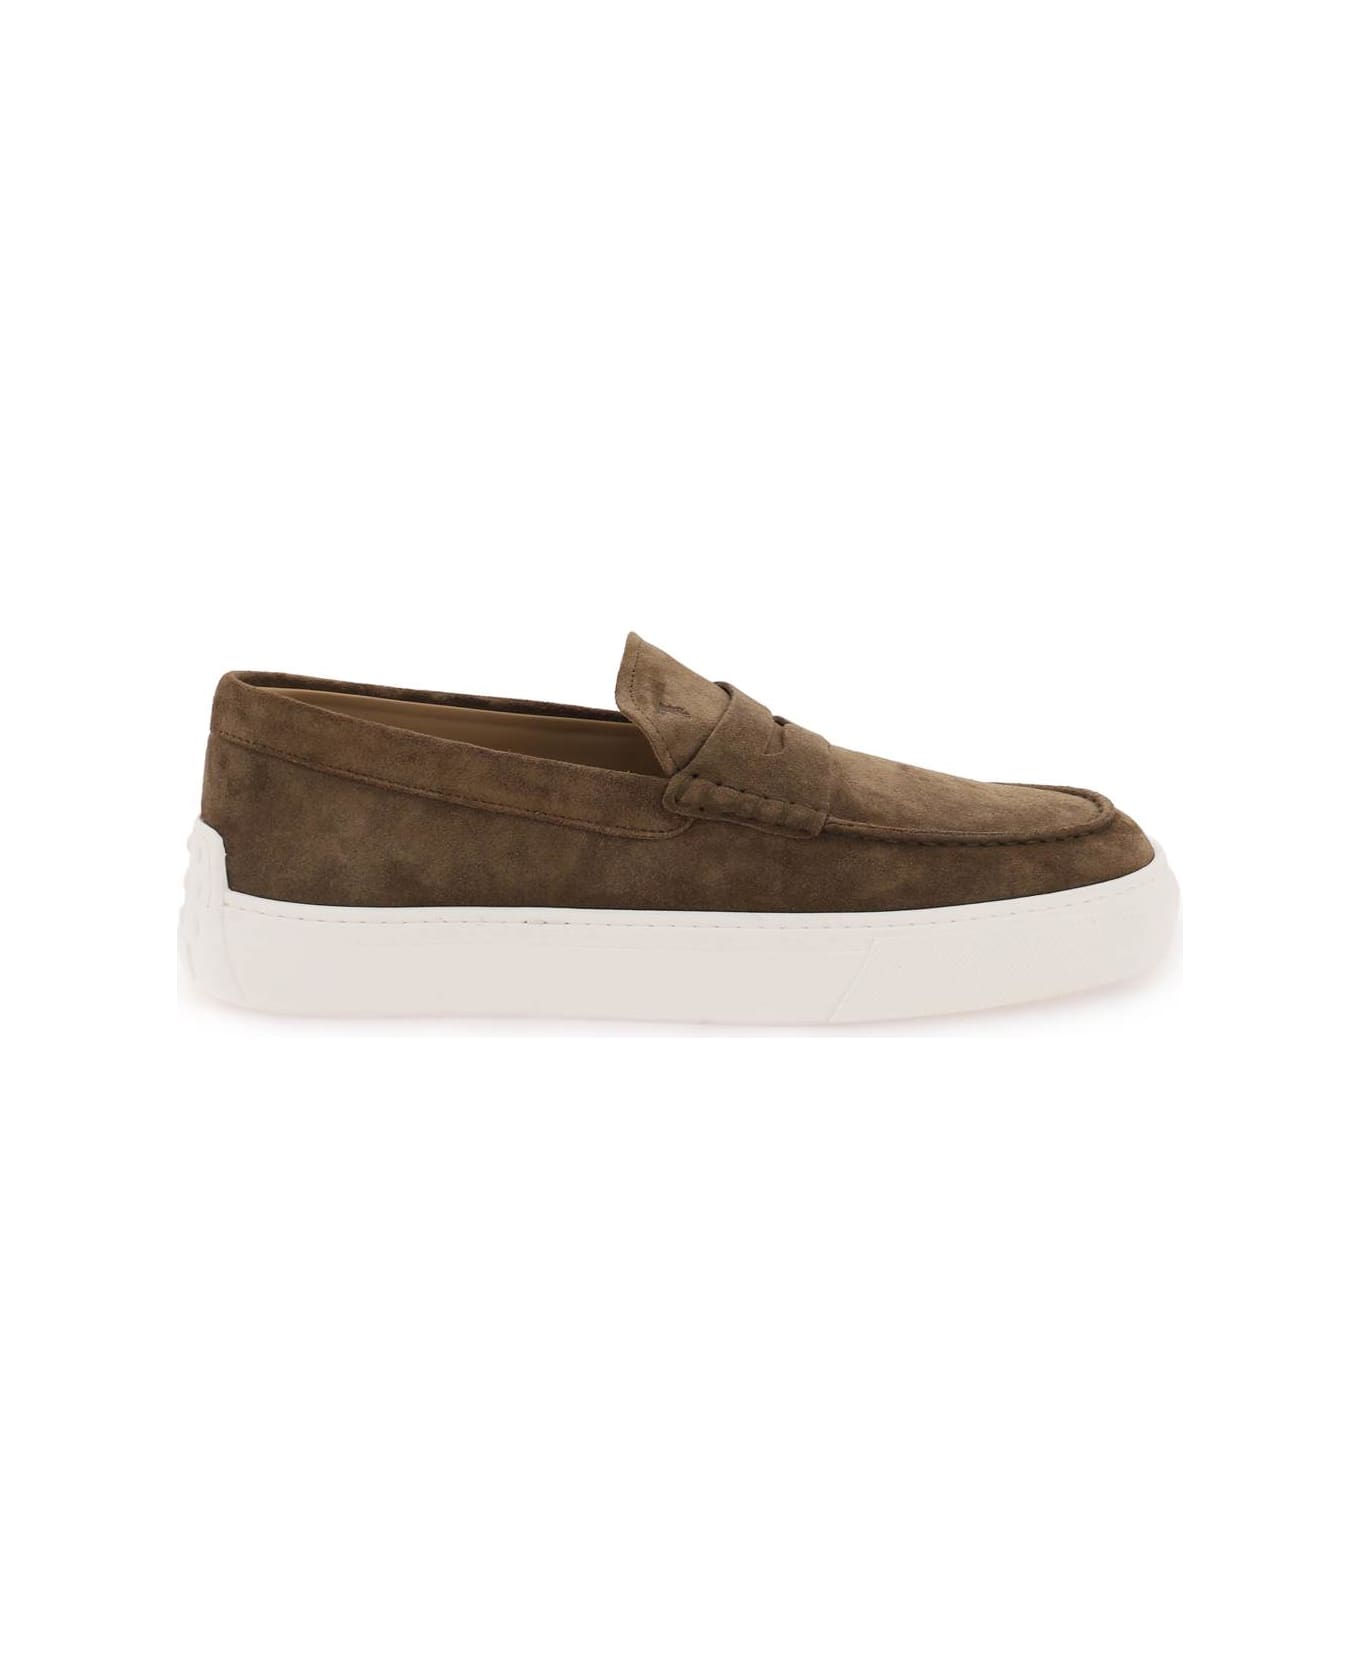 Tod's Loafers - NOCE CHIARO (Brown)